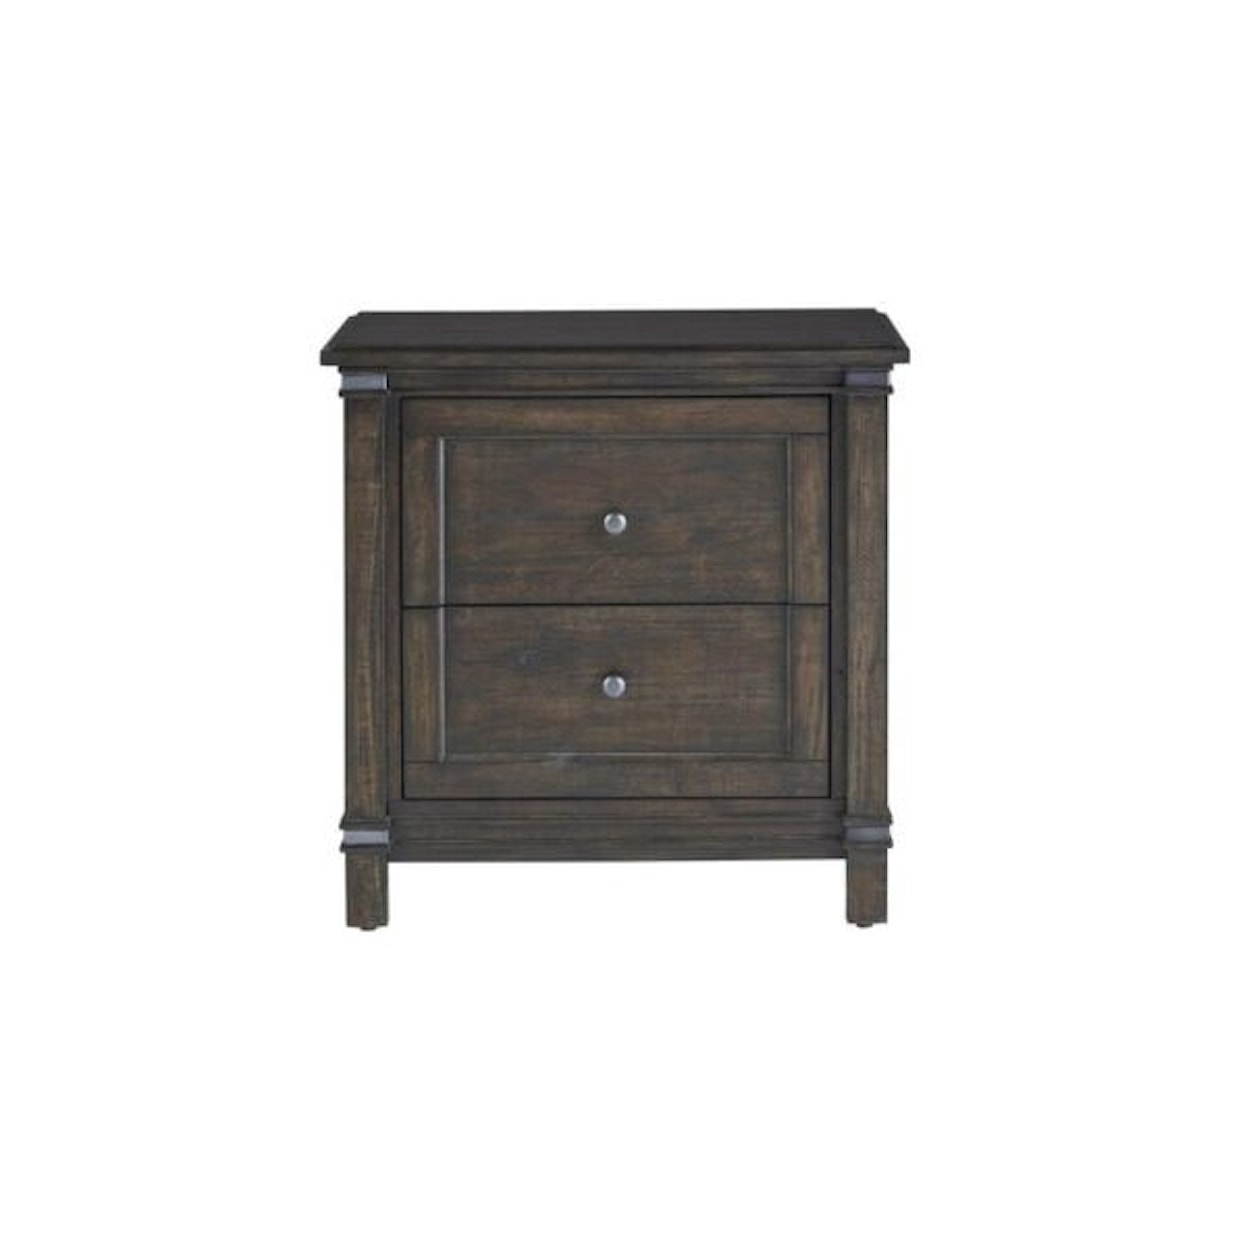 American Woodcrafters Farmwood 2-Drawer Nightstand